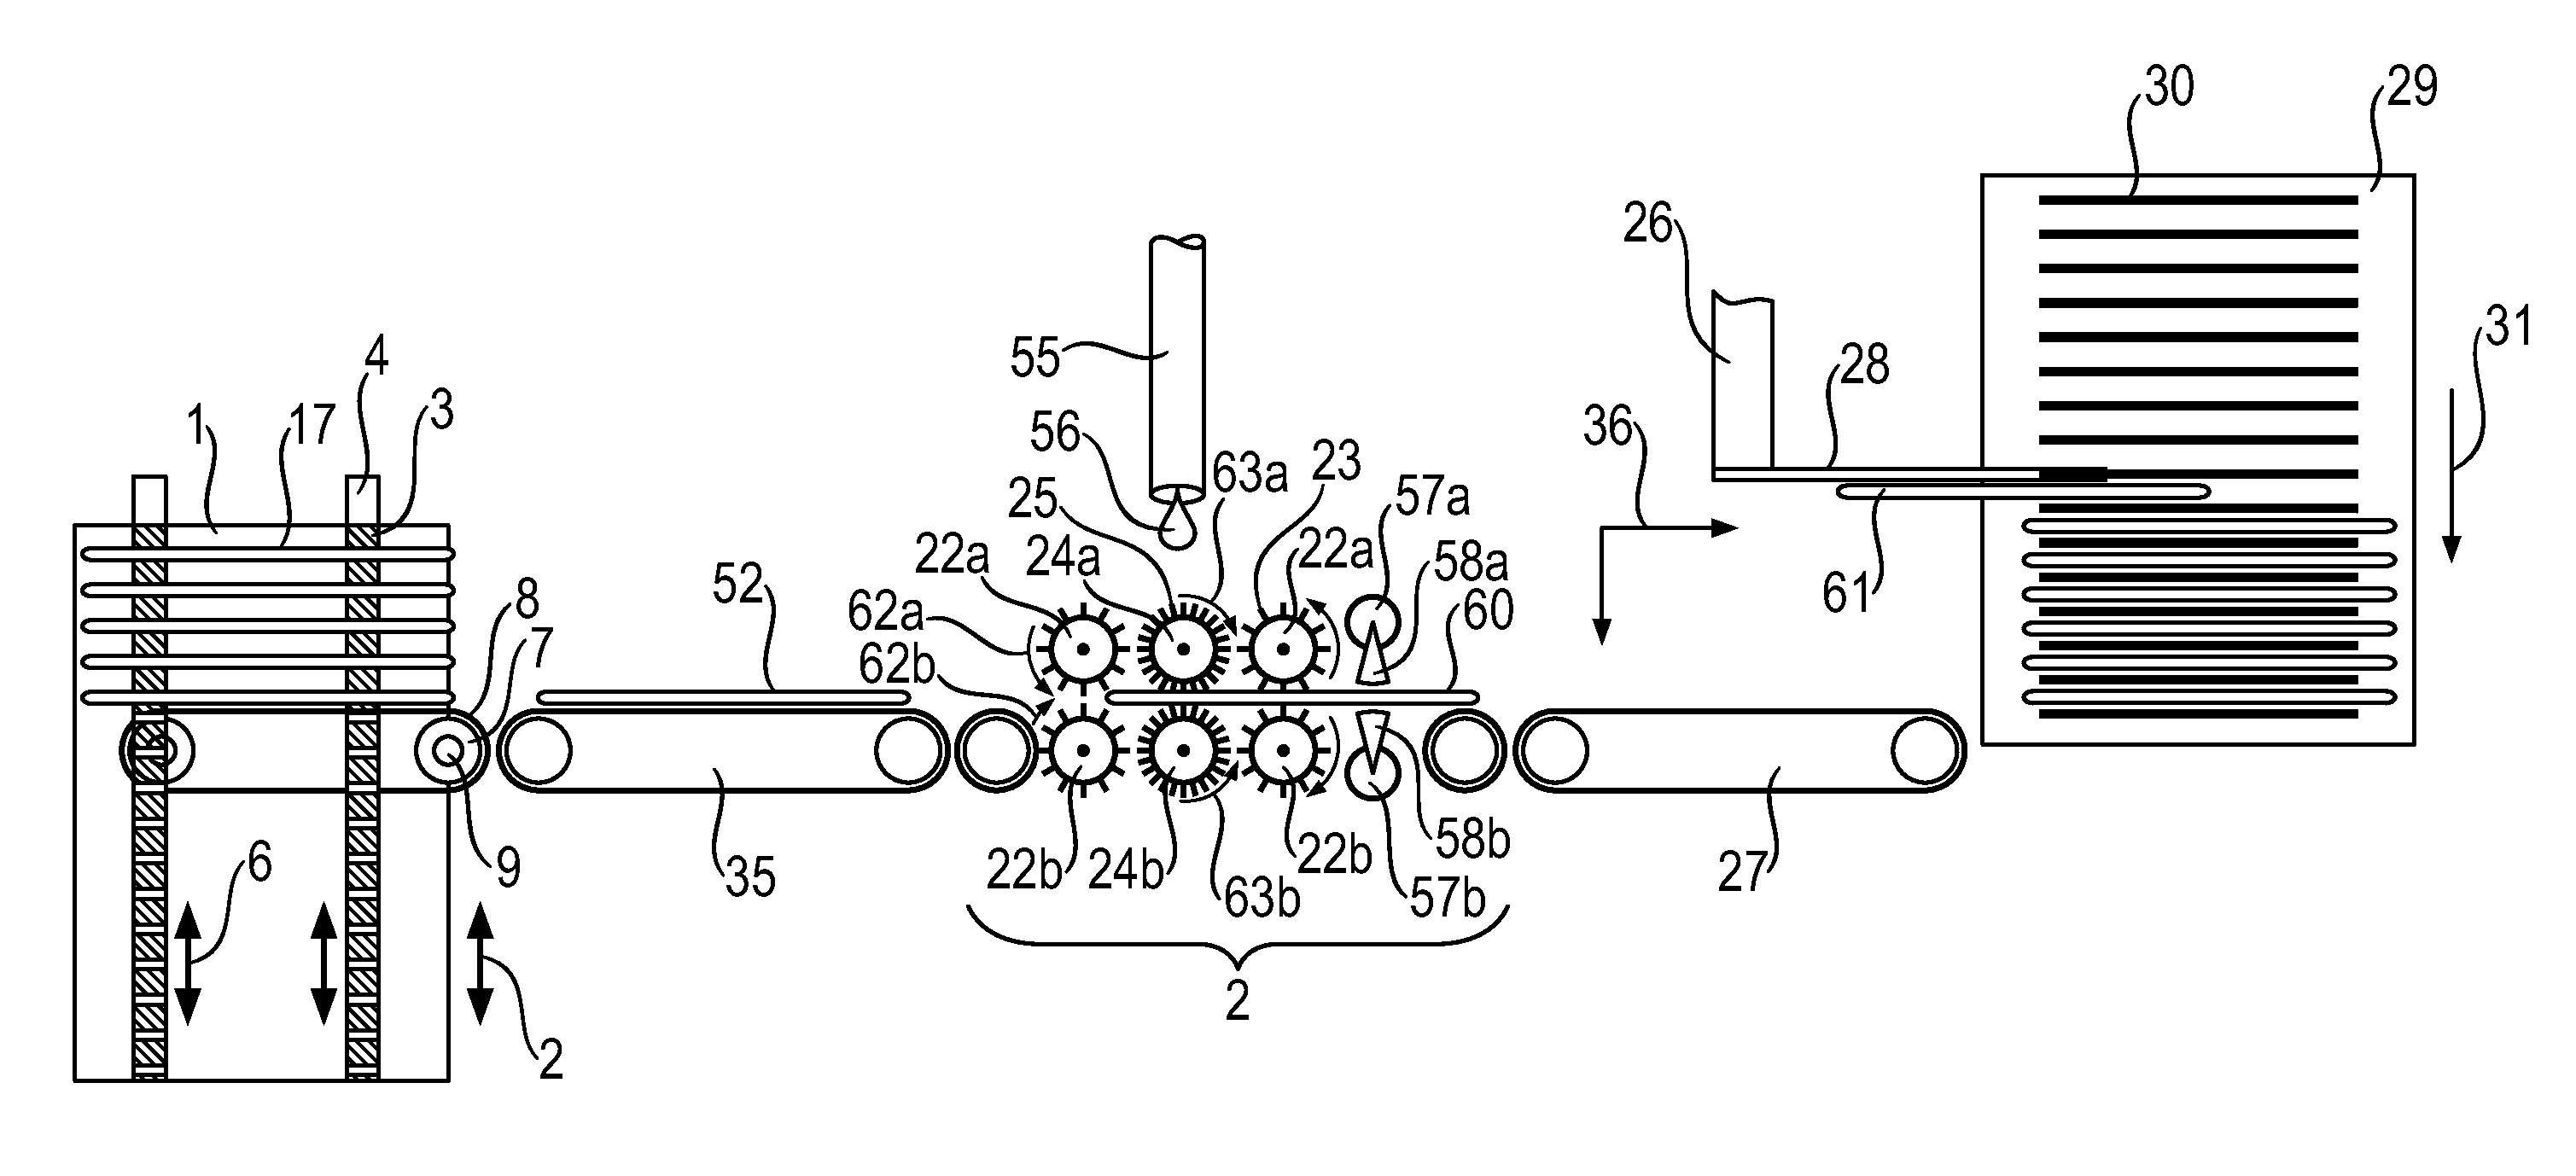 Device and Method For Buffer-Storing A Multiplicity of Wafer-Type Workpieces